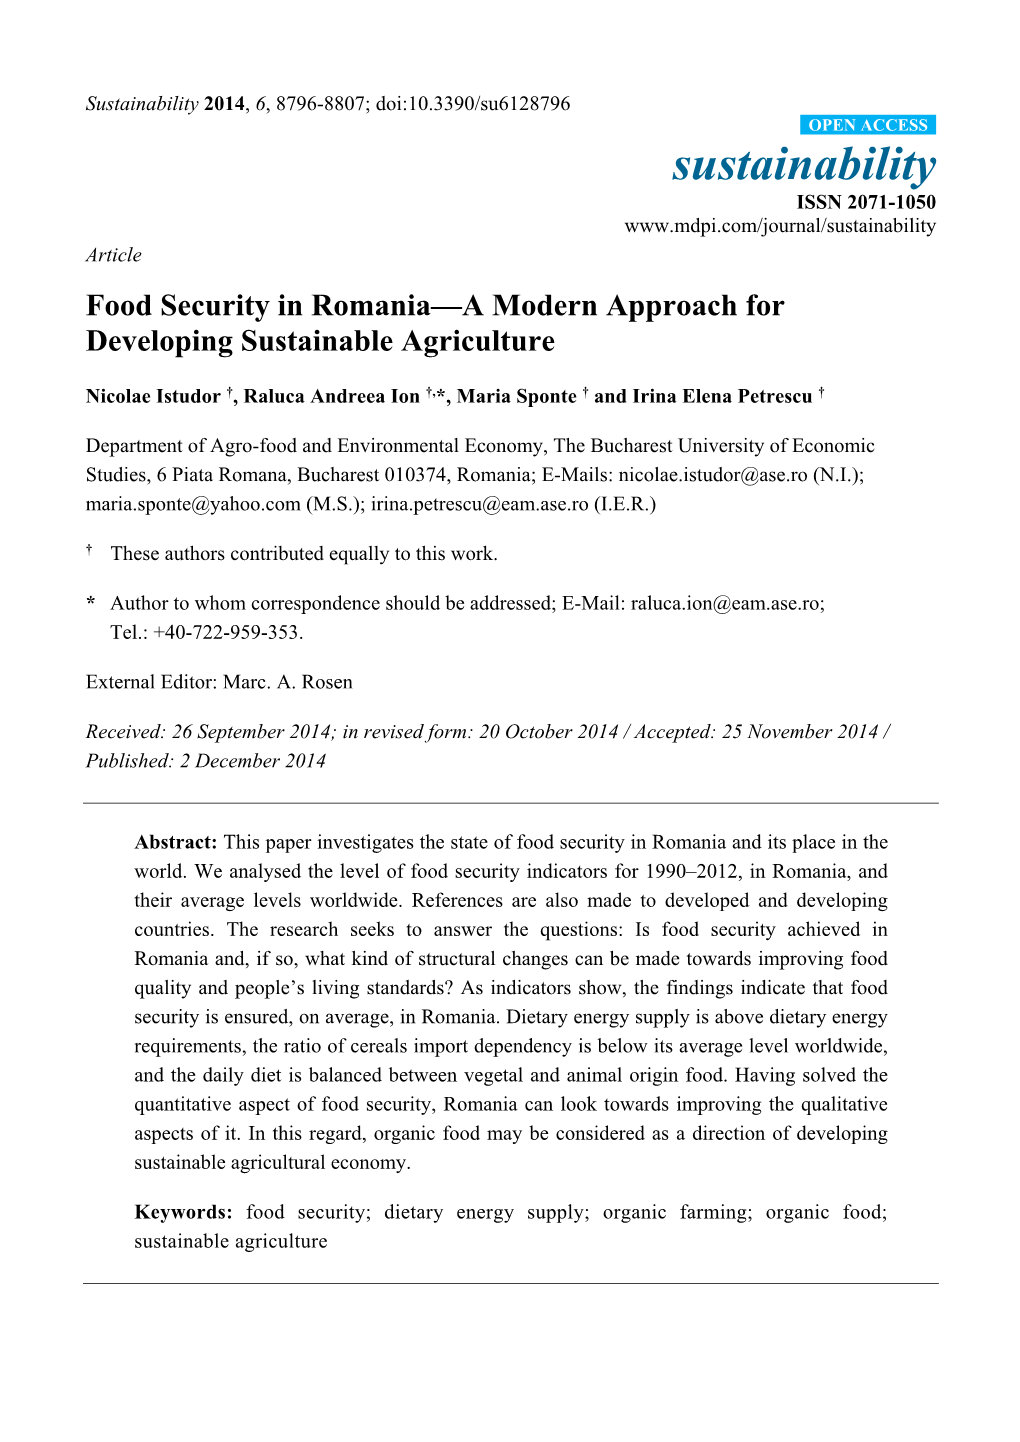 Food Security in Romania—A Modern Approach for Developing Sustainable Agriculture